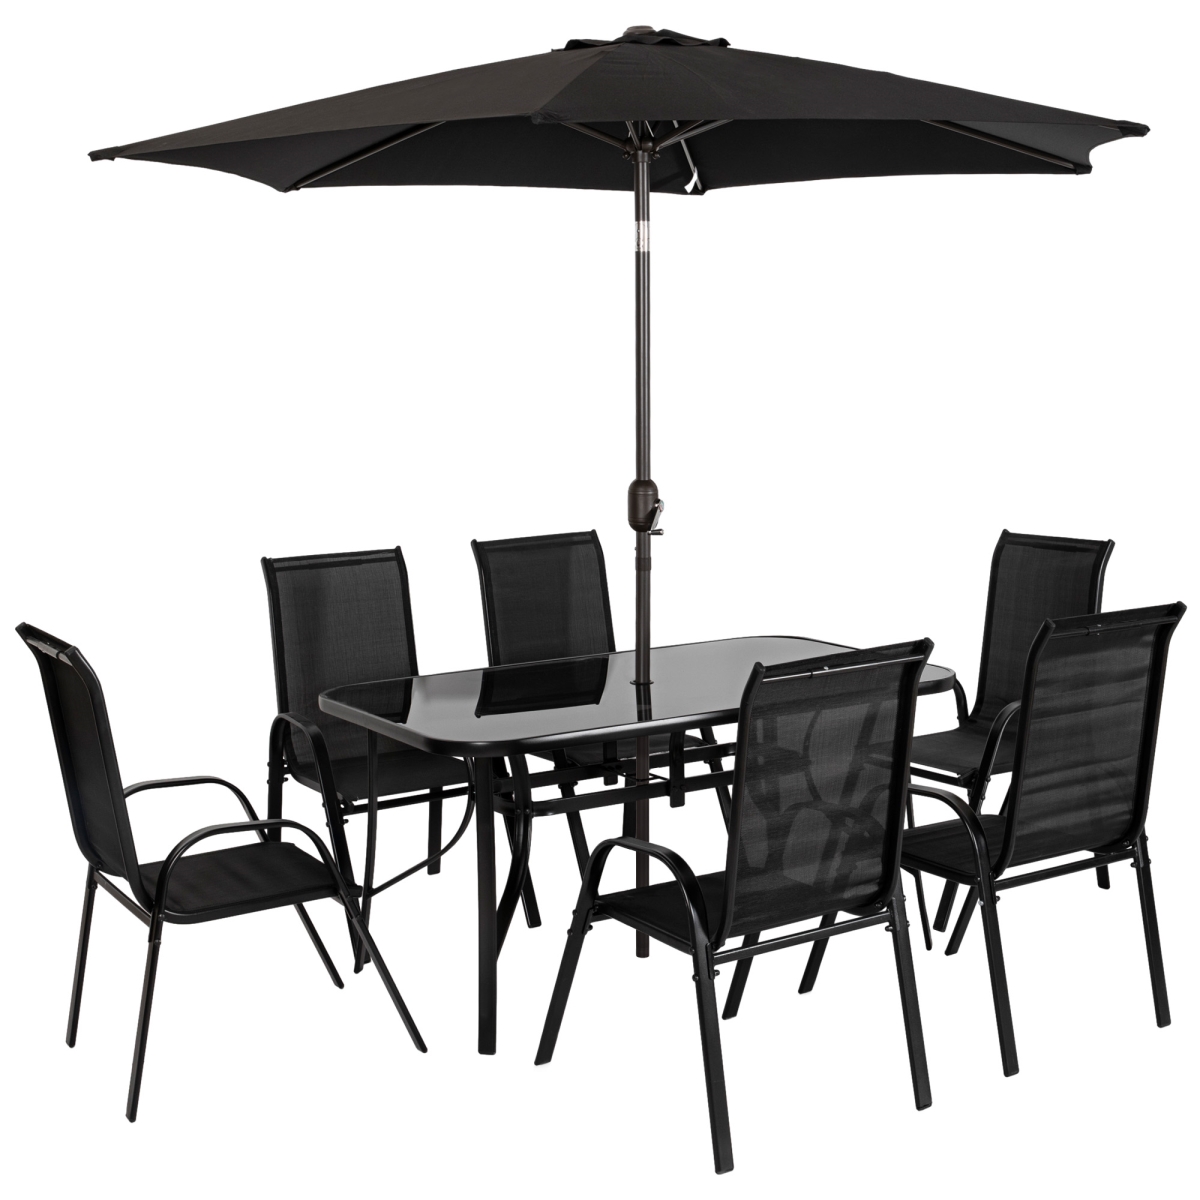 Picture of 212 Main 84B-921V00BK Outsunny Patio Furniture Set with 9 ft. Patio Umbrella&#44; Outdoor Dining Table & Chairs&#44; Black - 8 Piece